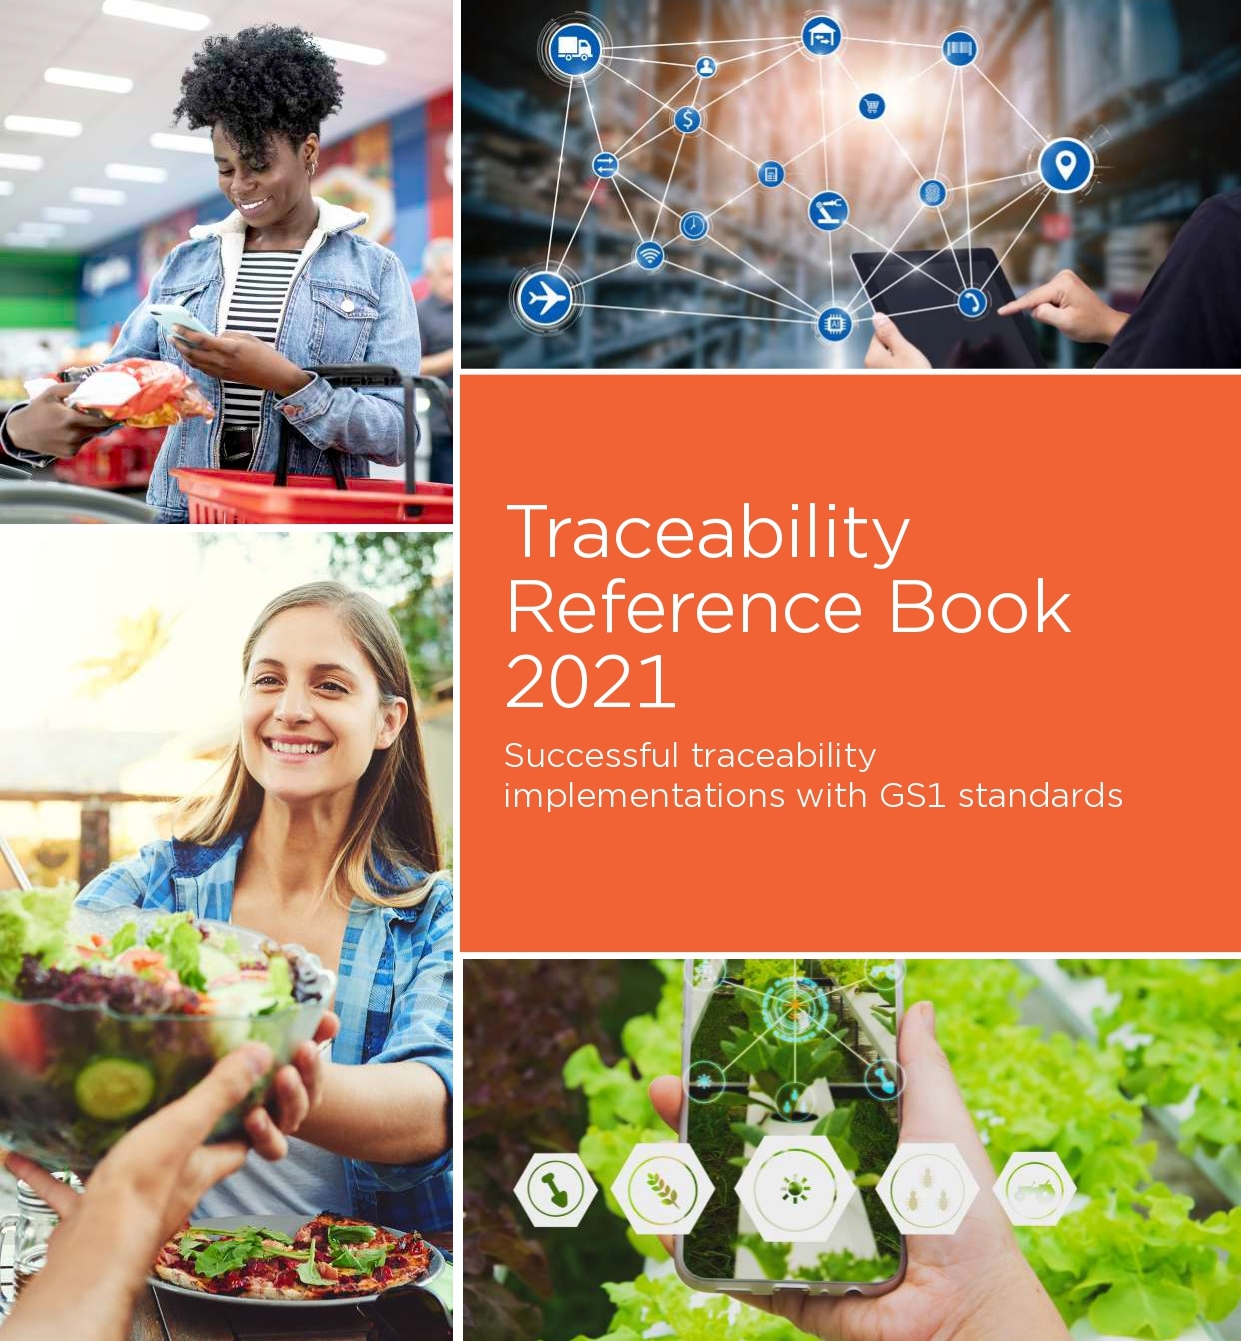 gs1-traceability-reference-book-2021